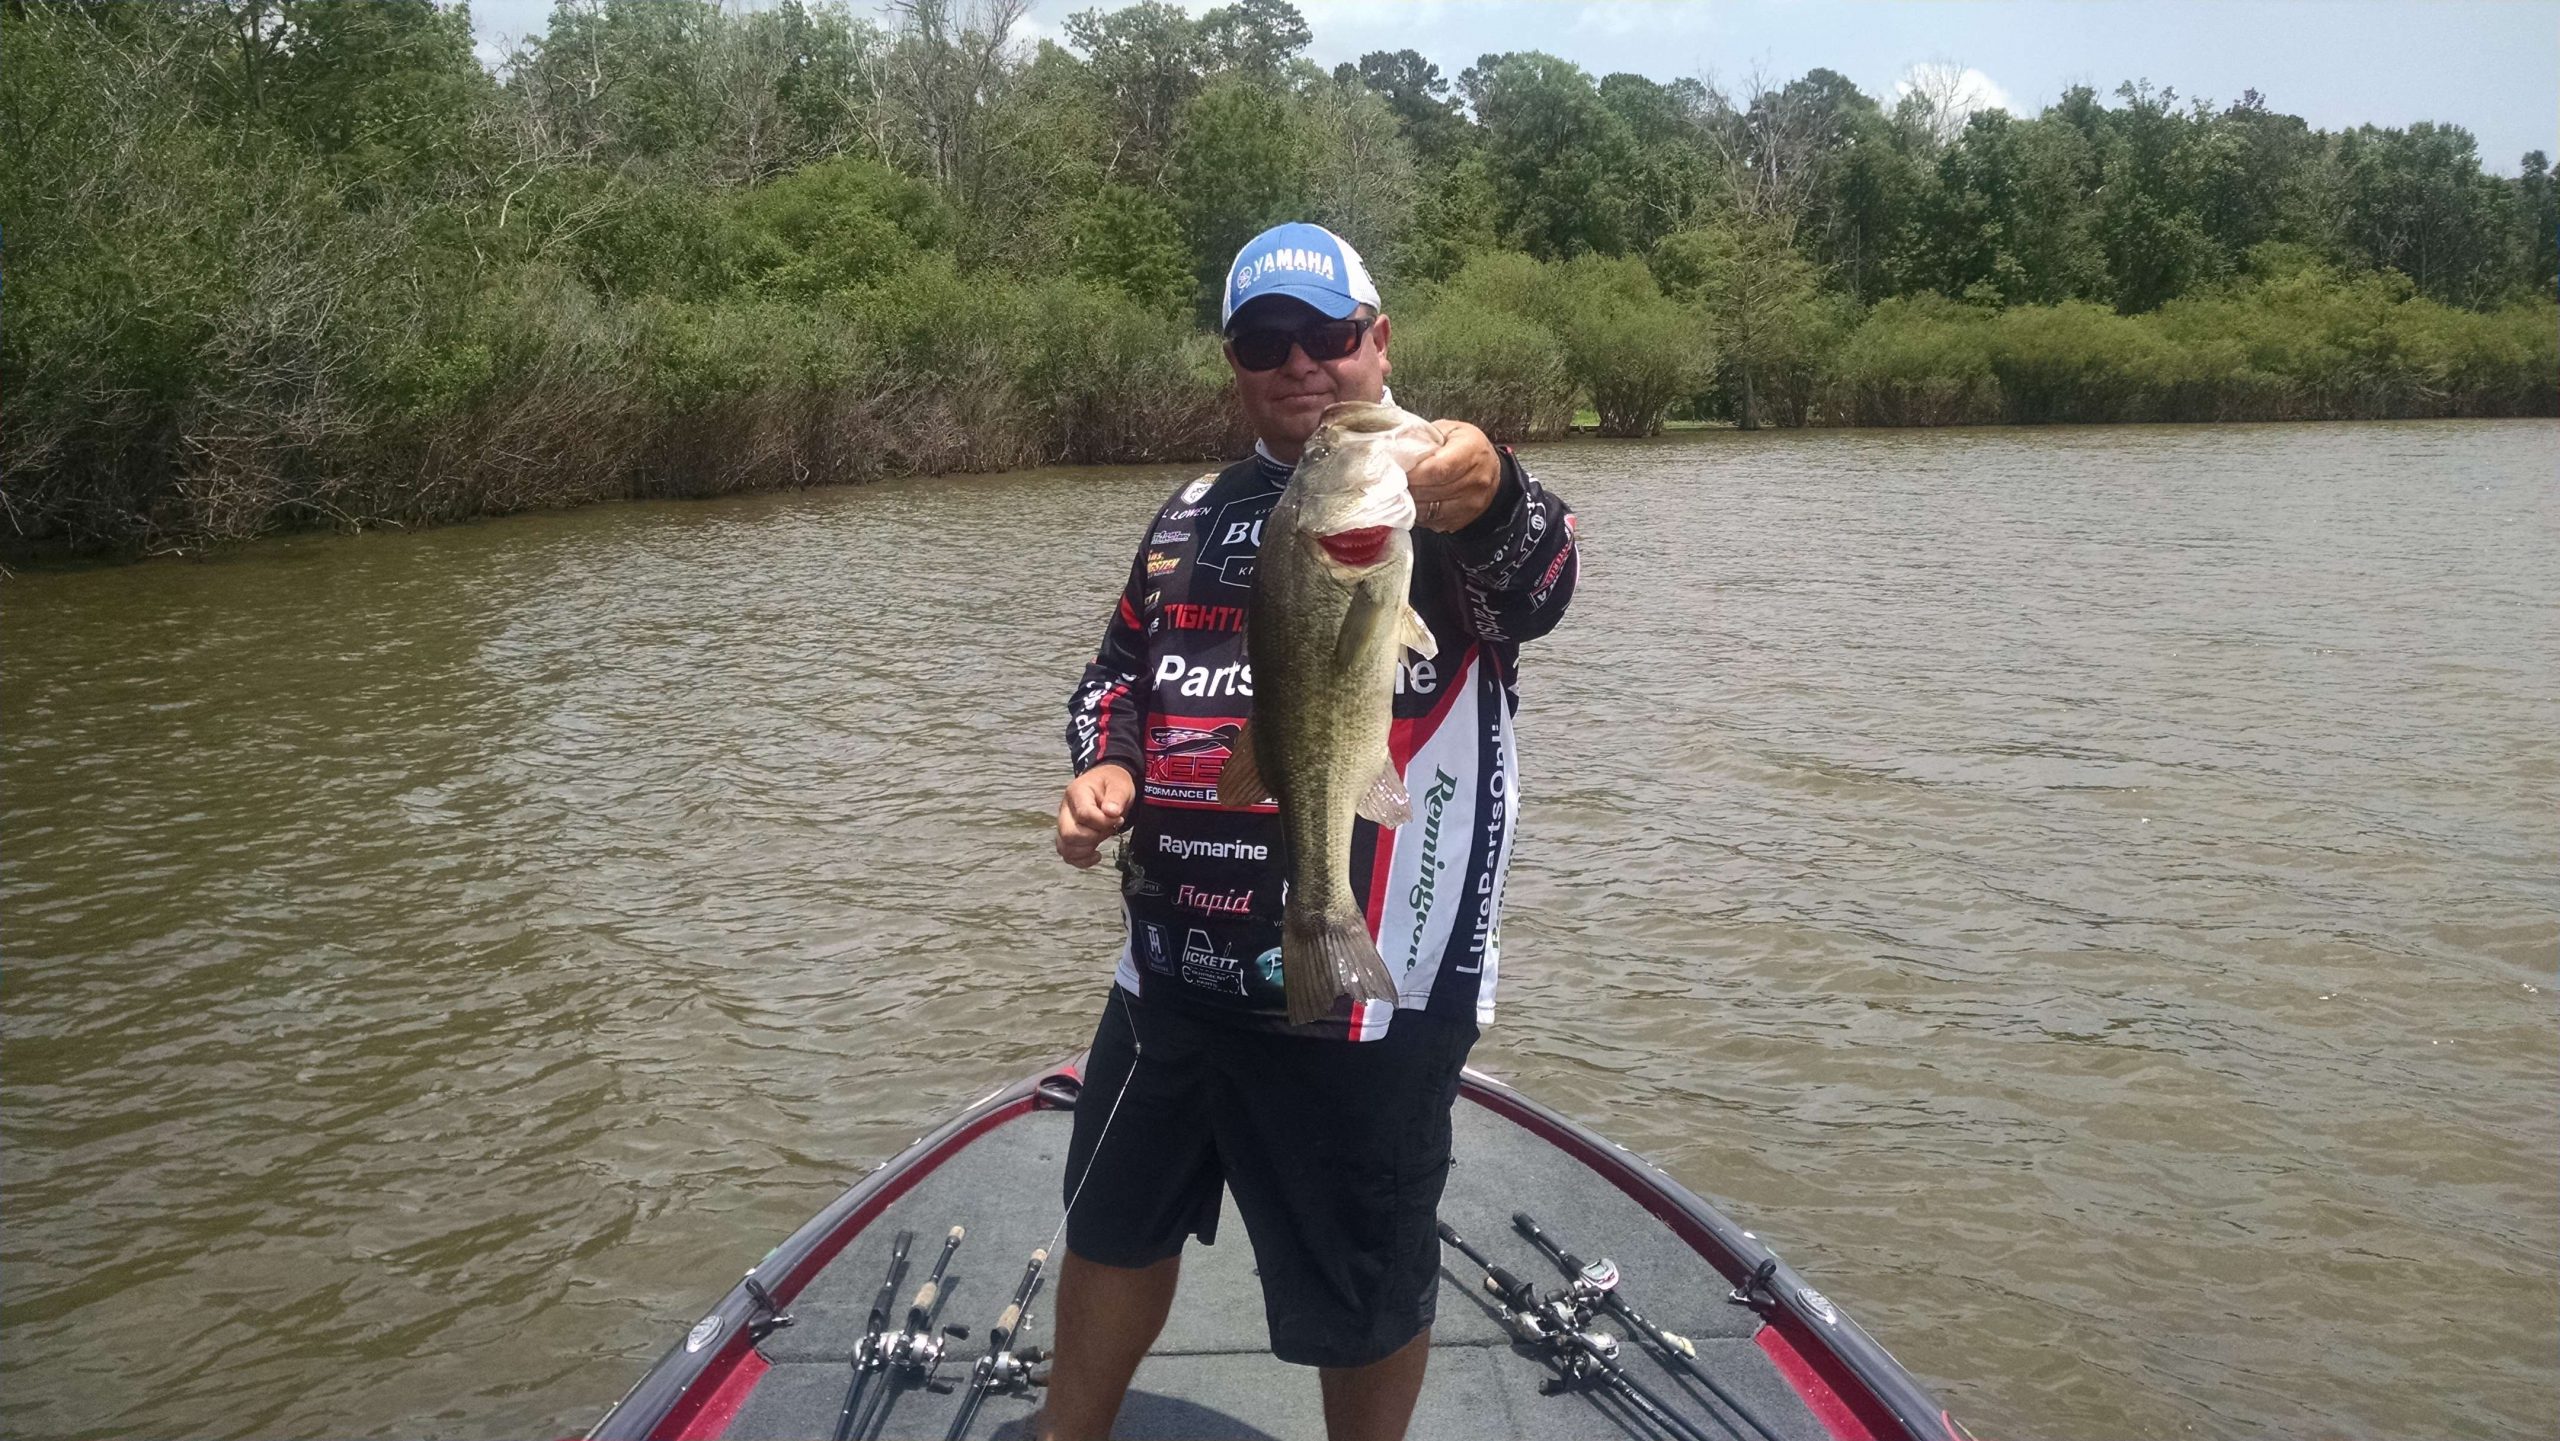 Solid 4-pounder for Bill Lowen to make great upgrade to his limit for today